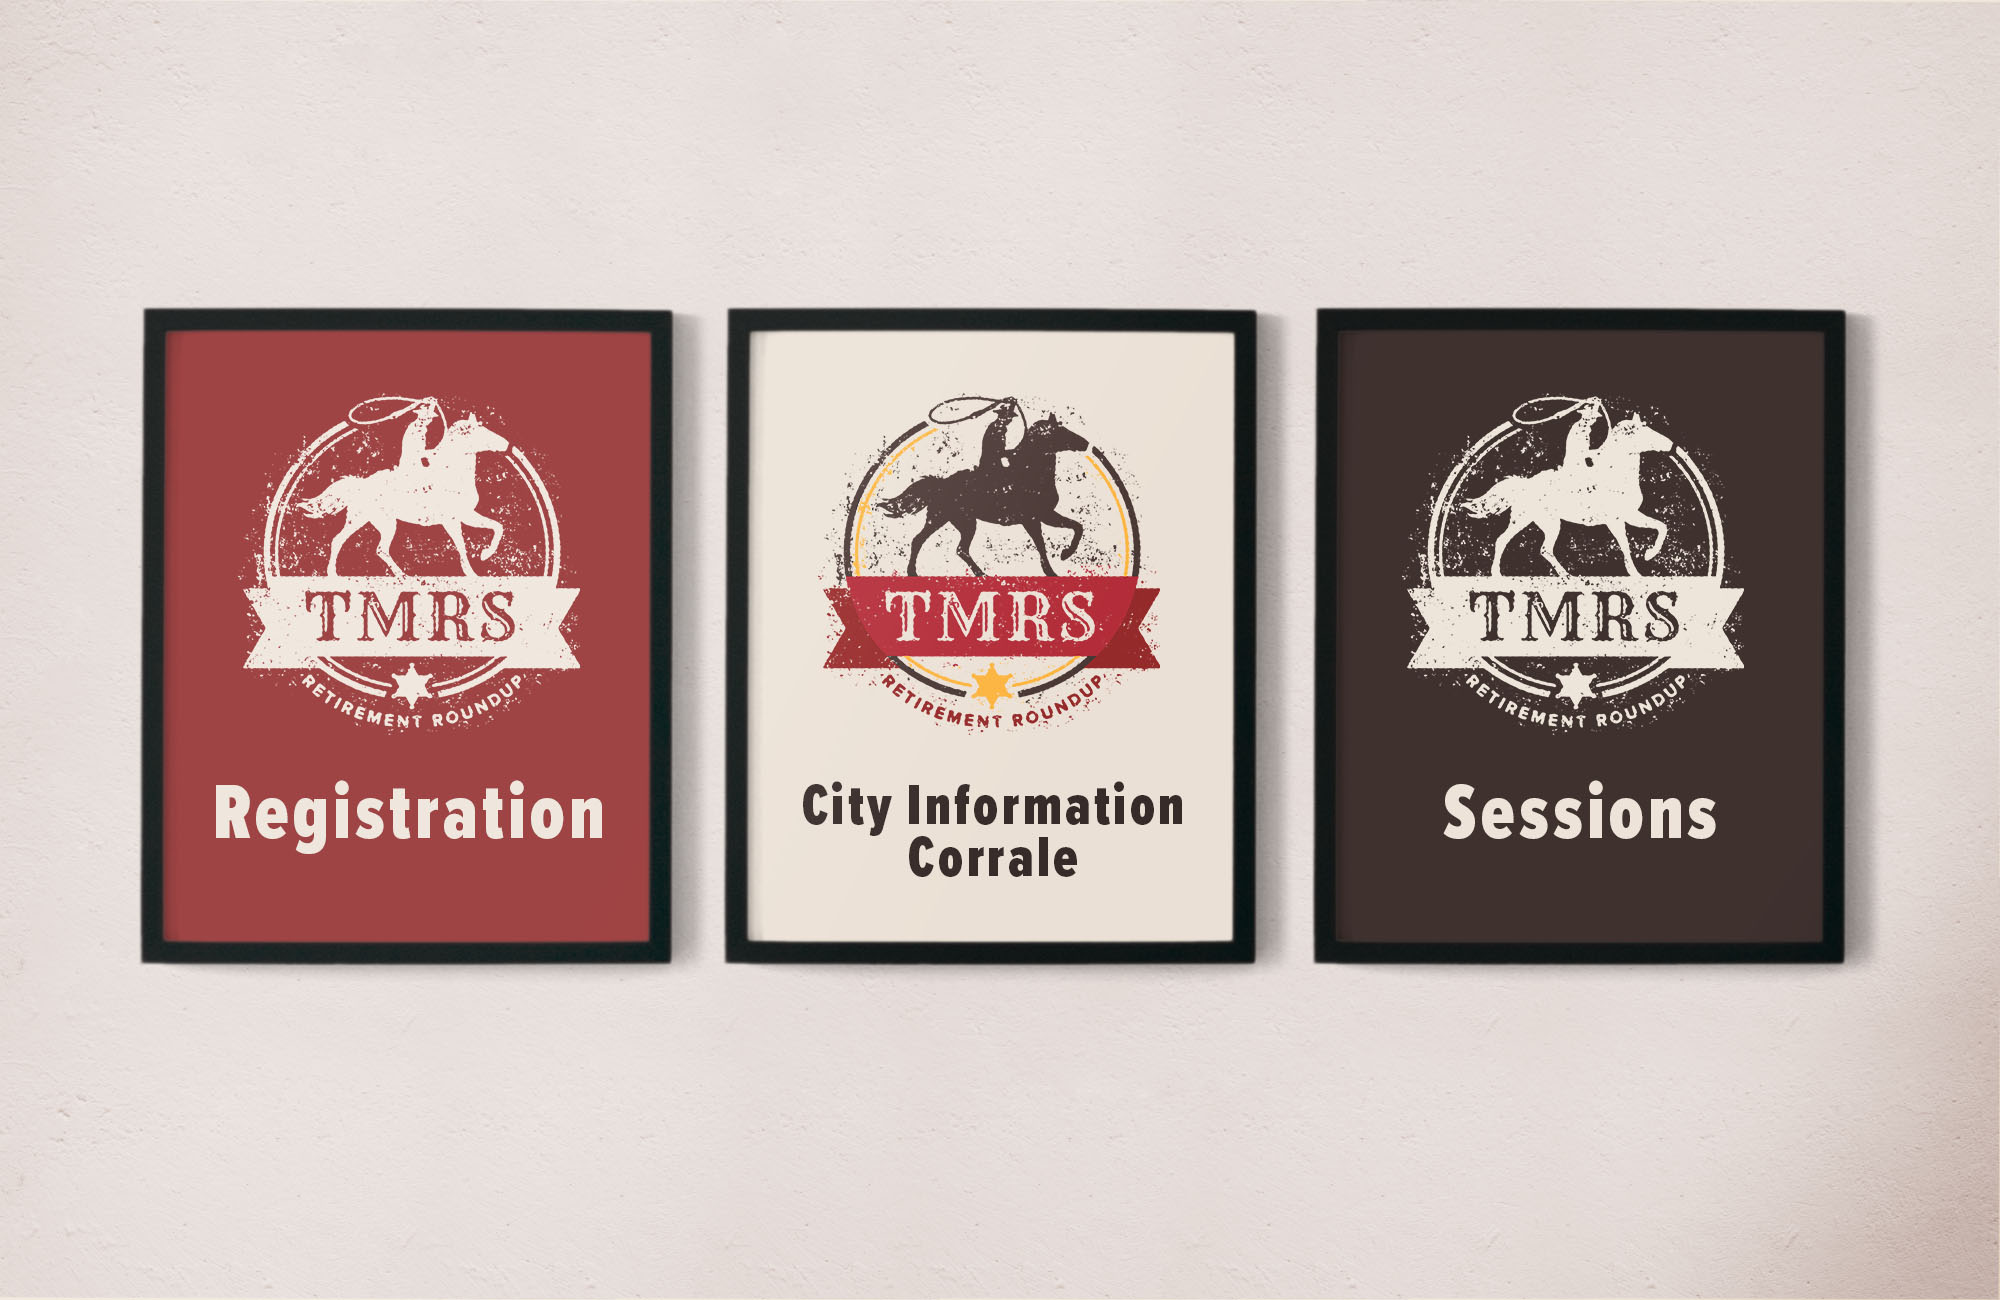 Three similar signs are hung up on a white wall. All three feature the Retirement Roundup emblem, but with different color schemes. The middle sign has a cream background with the full color logo and City Information Corrale written underneath. The left sign has a read background with a cream logo and says Registration, The right sign has a brown background with a cream logo and says Sessions